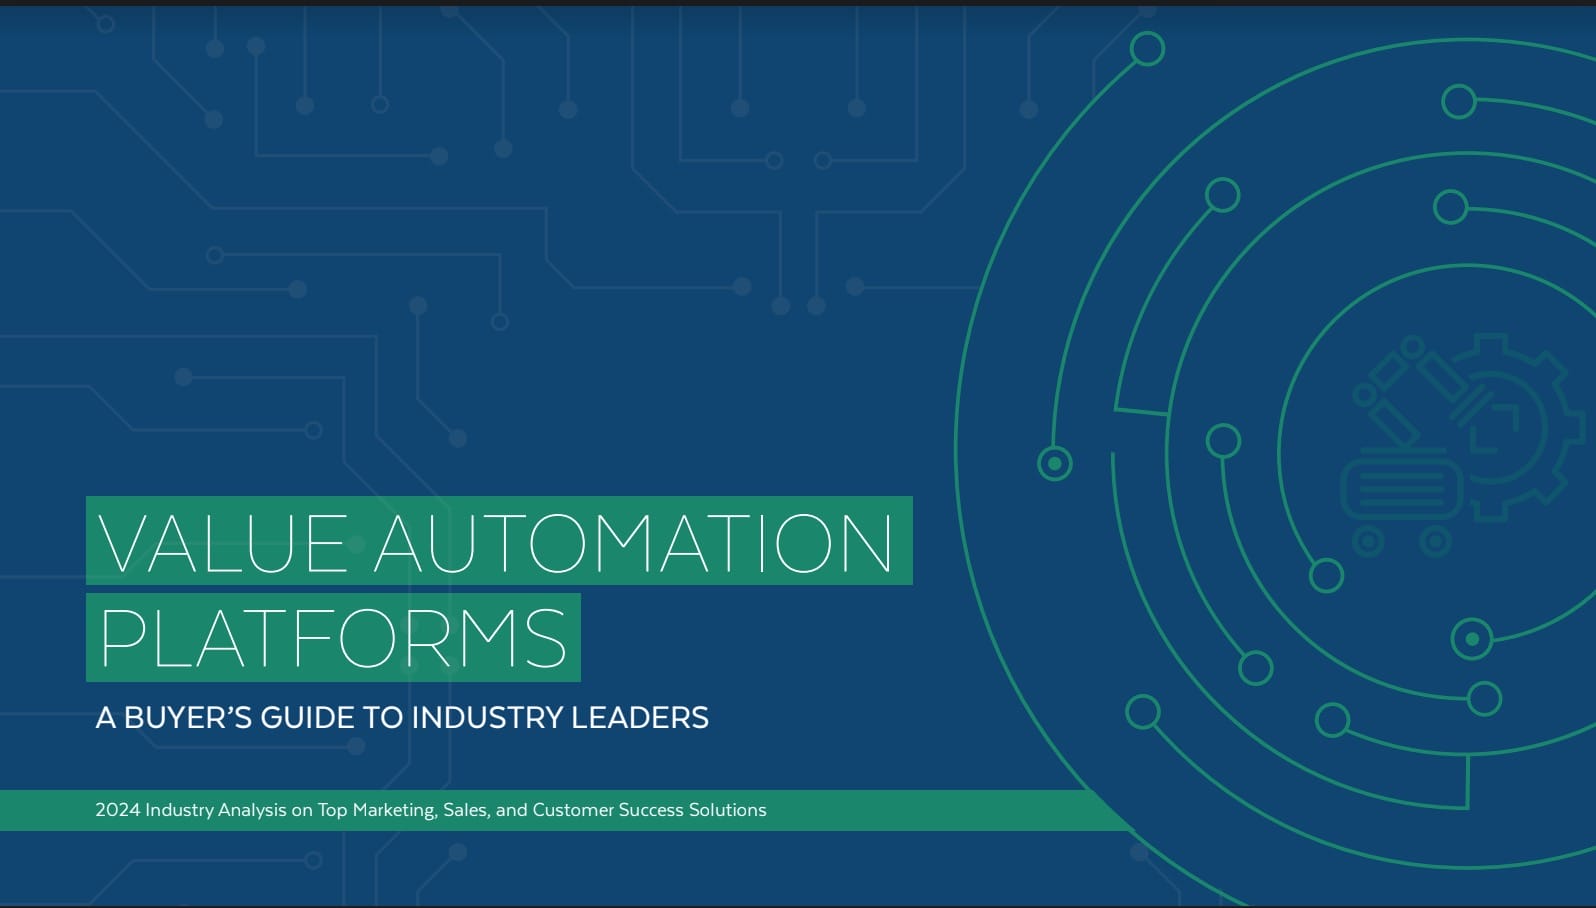 Genius Drive Introduces the First-Ever Value Automation Platform Buyer’s Guide